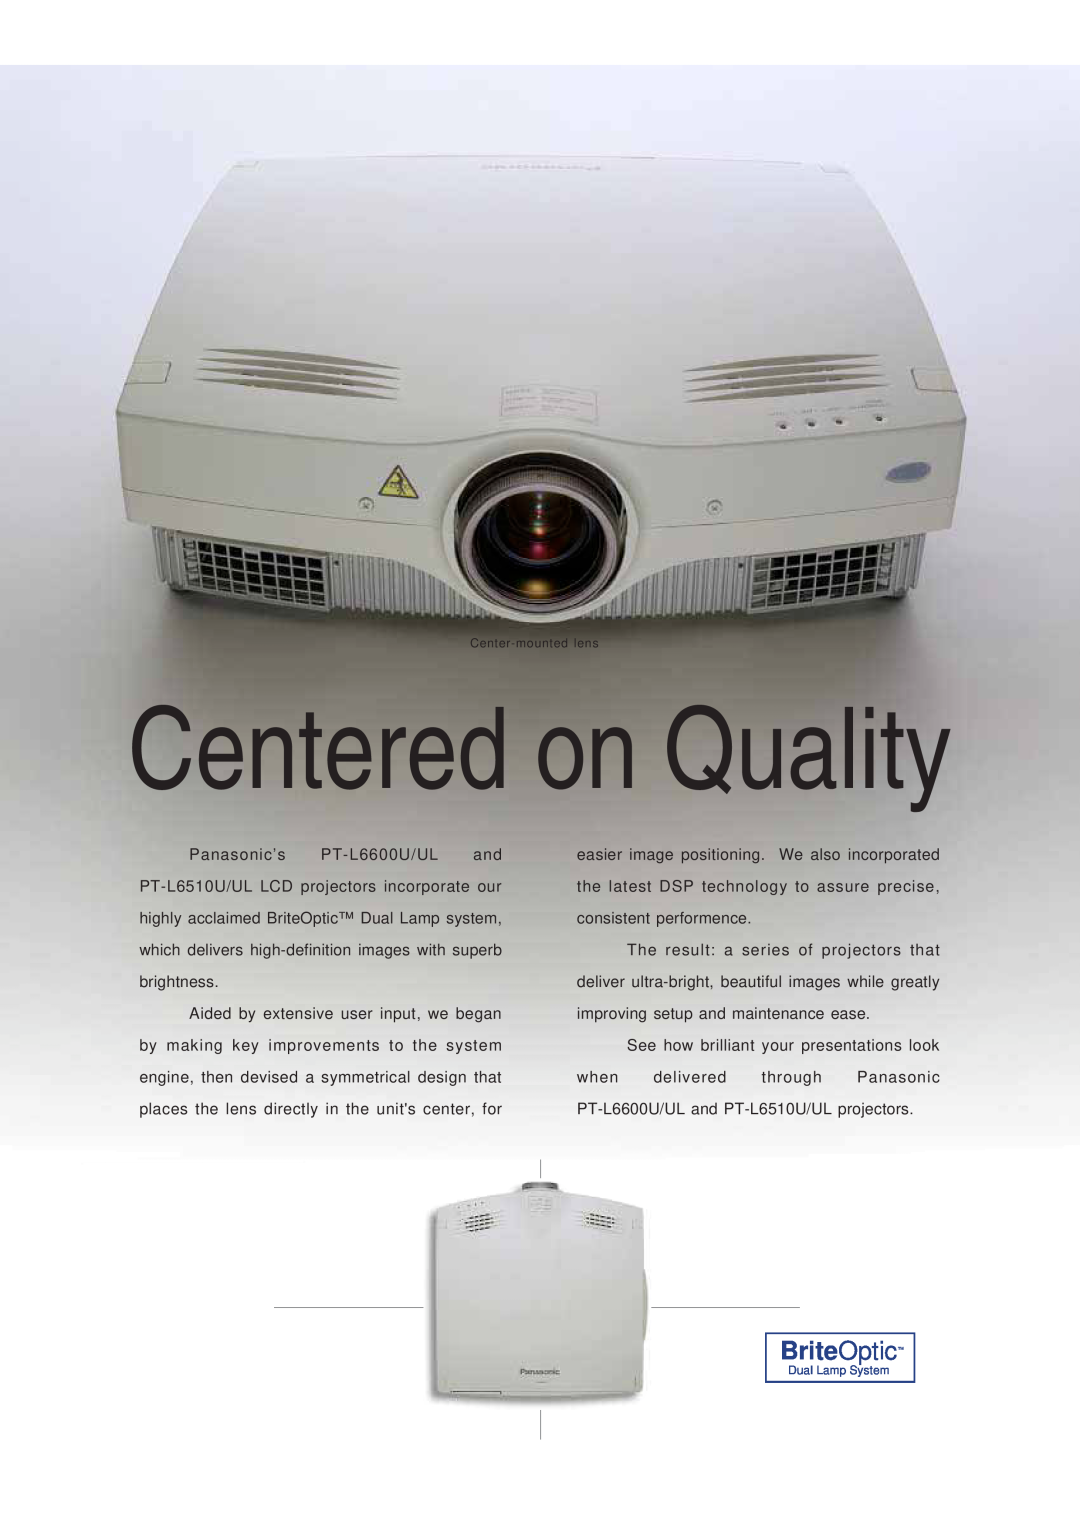 Panasonic PT-L6510UL, PT-L6600UL manual Centered on Quality, BriteOptic, See how brilliant your presentations look 